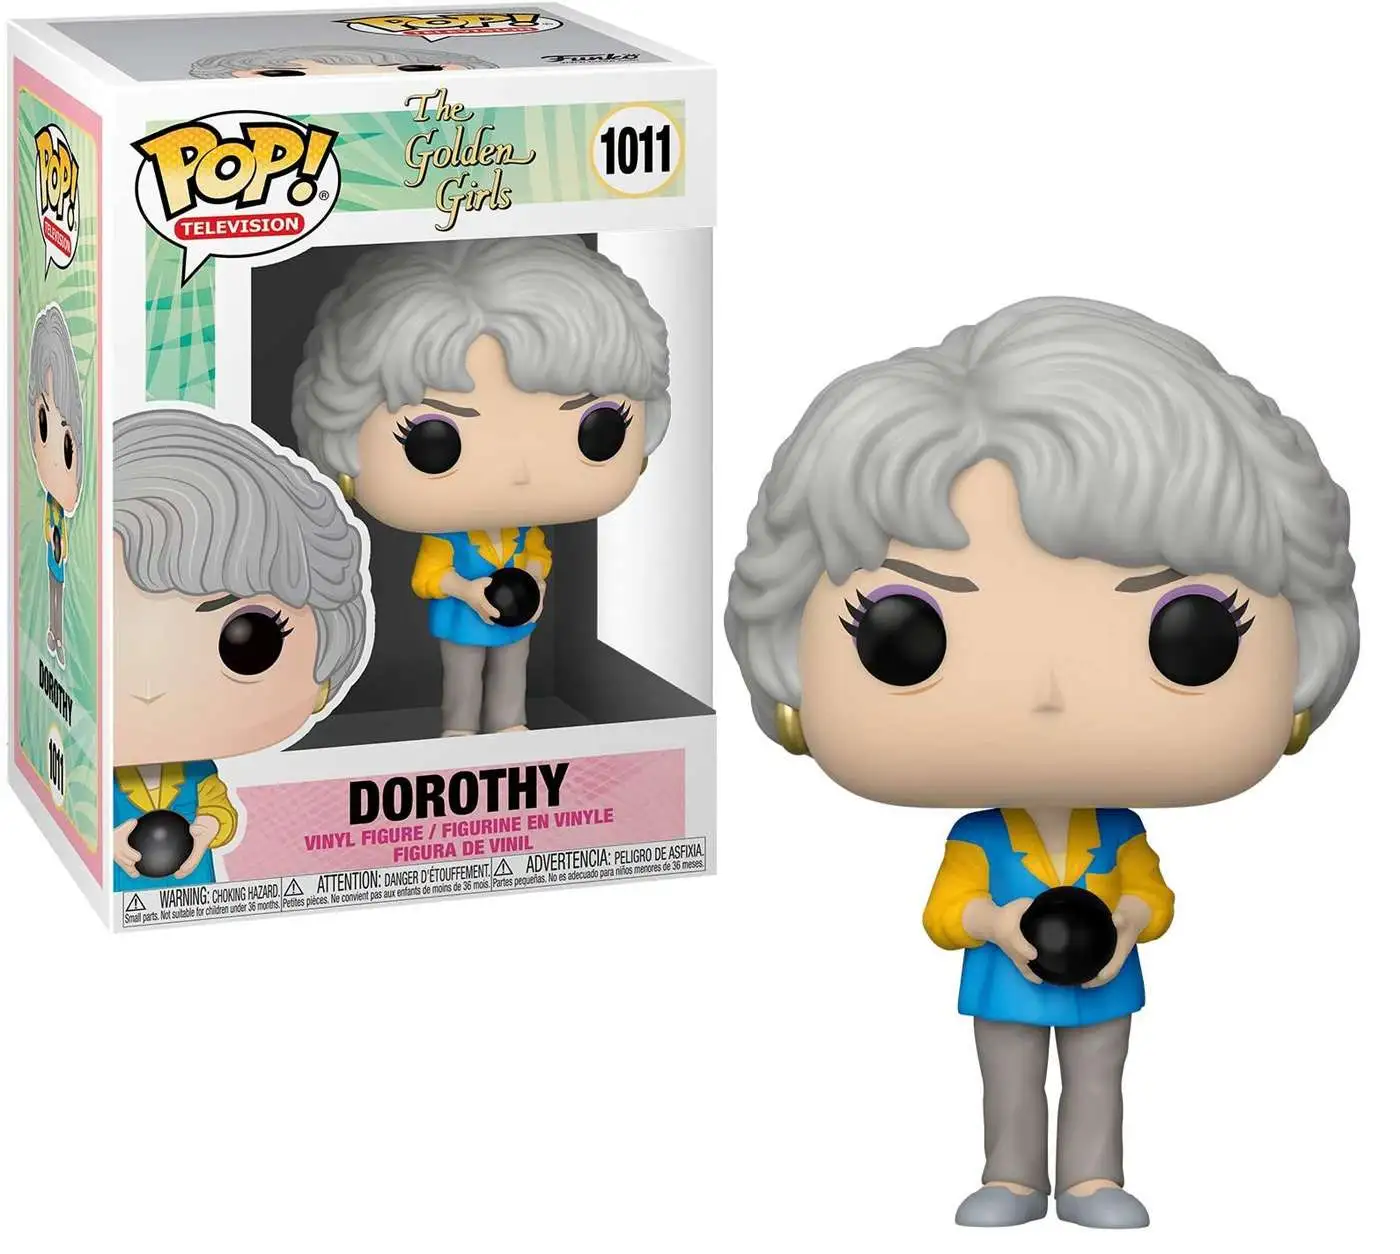 DOROTHY #326 FUNKO POP BRAND NEW THE GOLDEN GIRLS US TELEVISION SERIES 